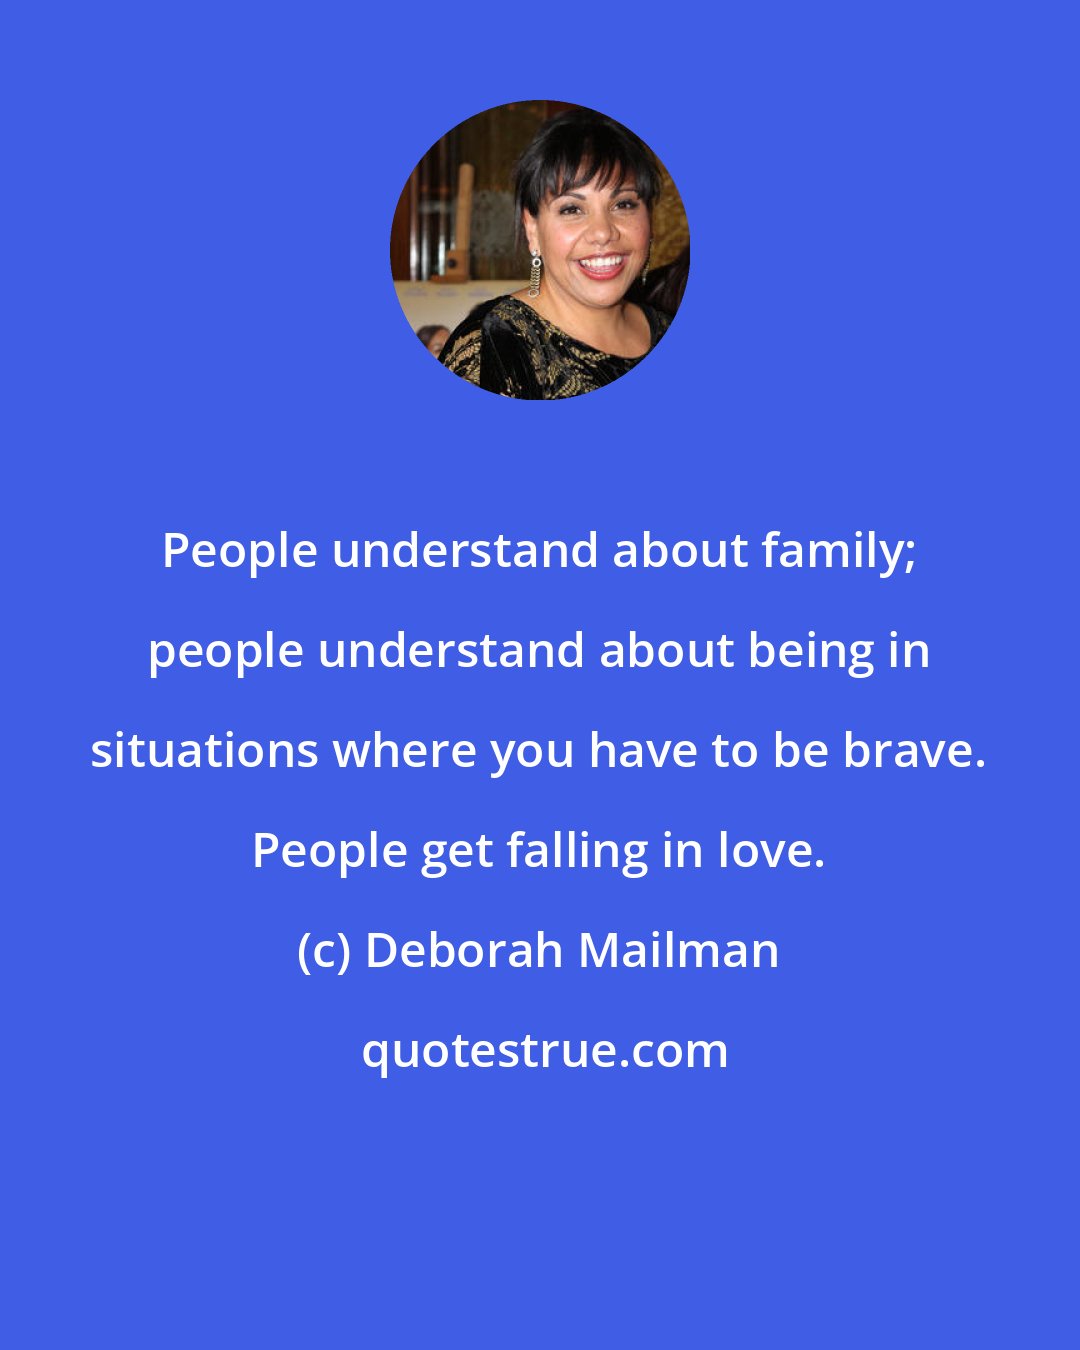 Deborah Mailman: People understand about family; people understand about being in situations where you have to be brave. People get falling in love.